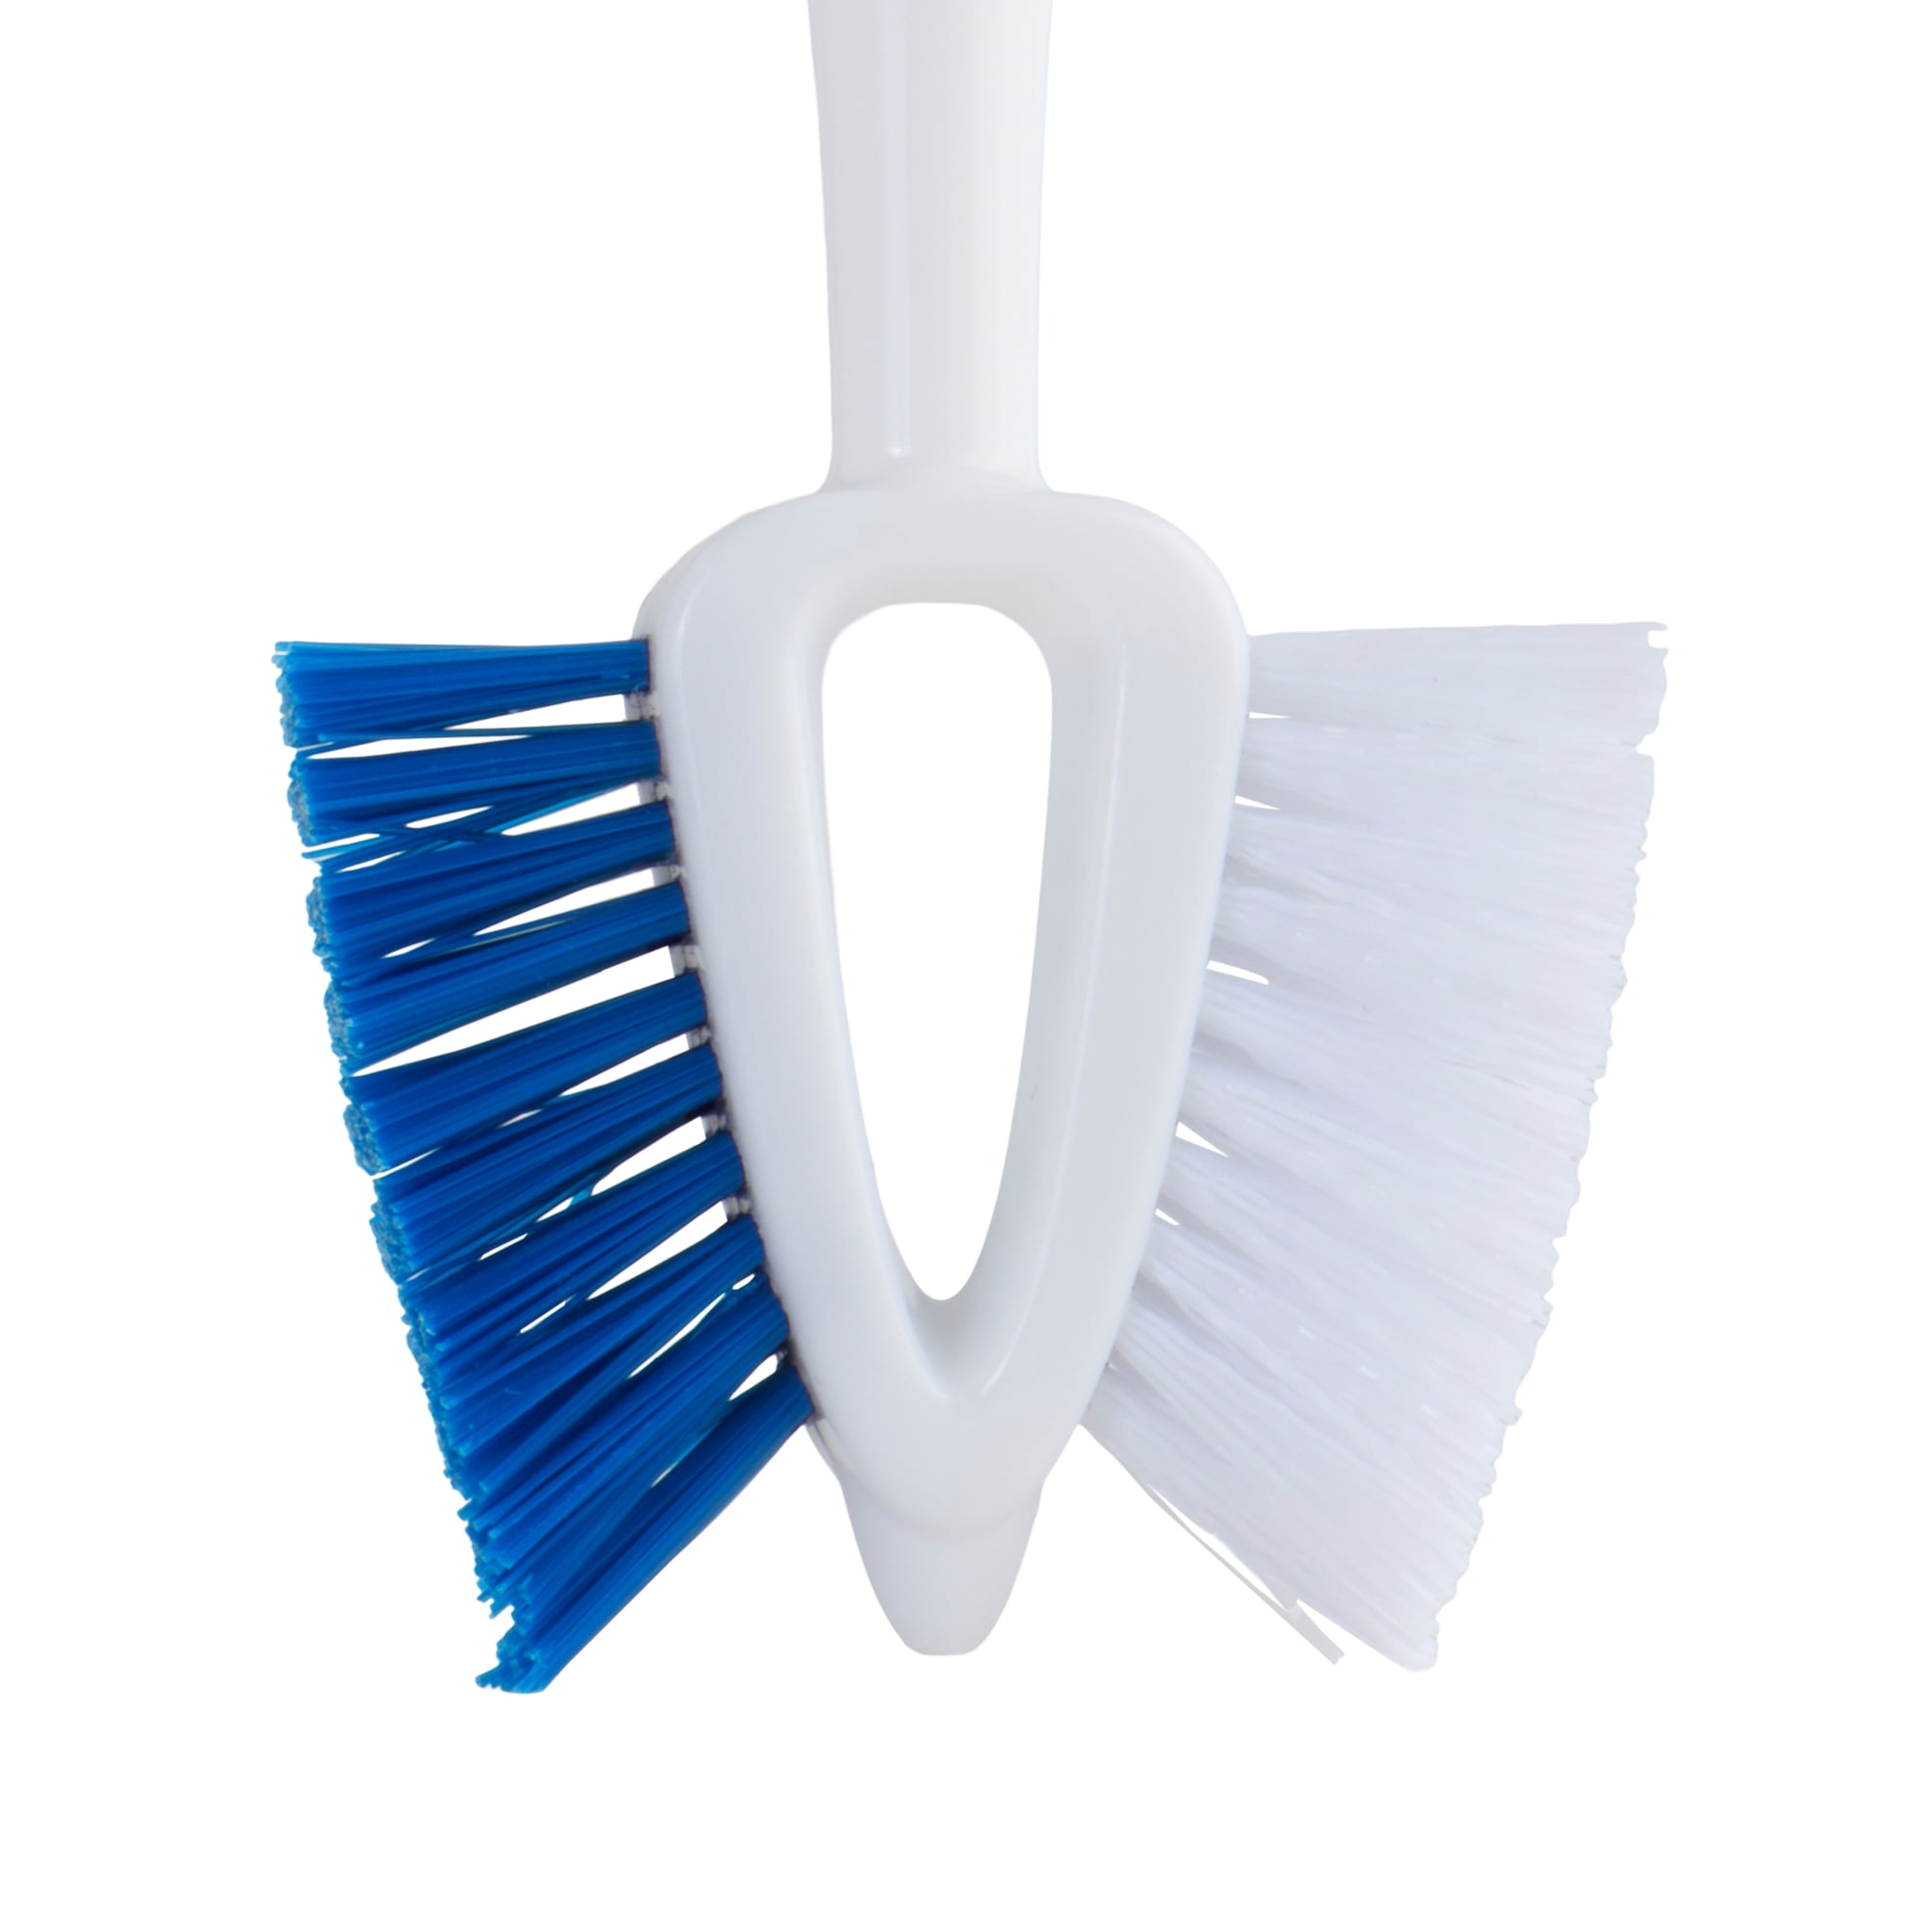 Luxafare Bathroom Cleaning Brush with Wiper 2 in 1 Tiles Cleaning